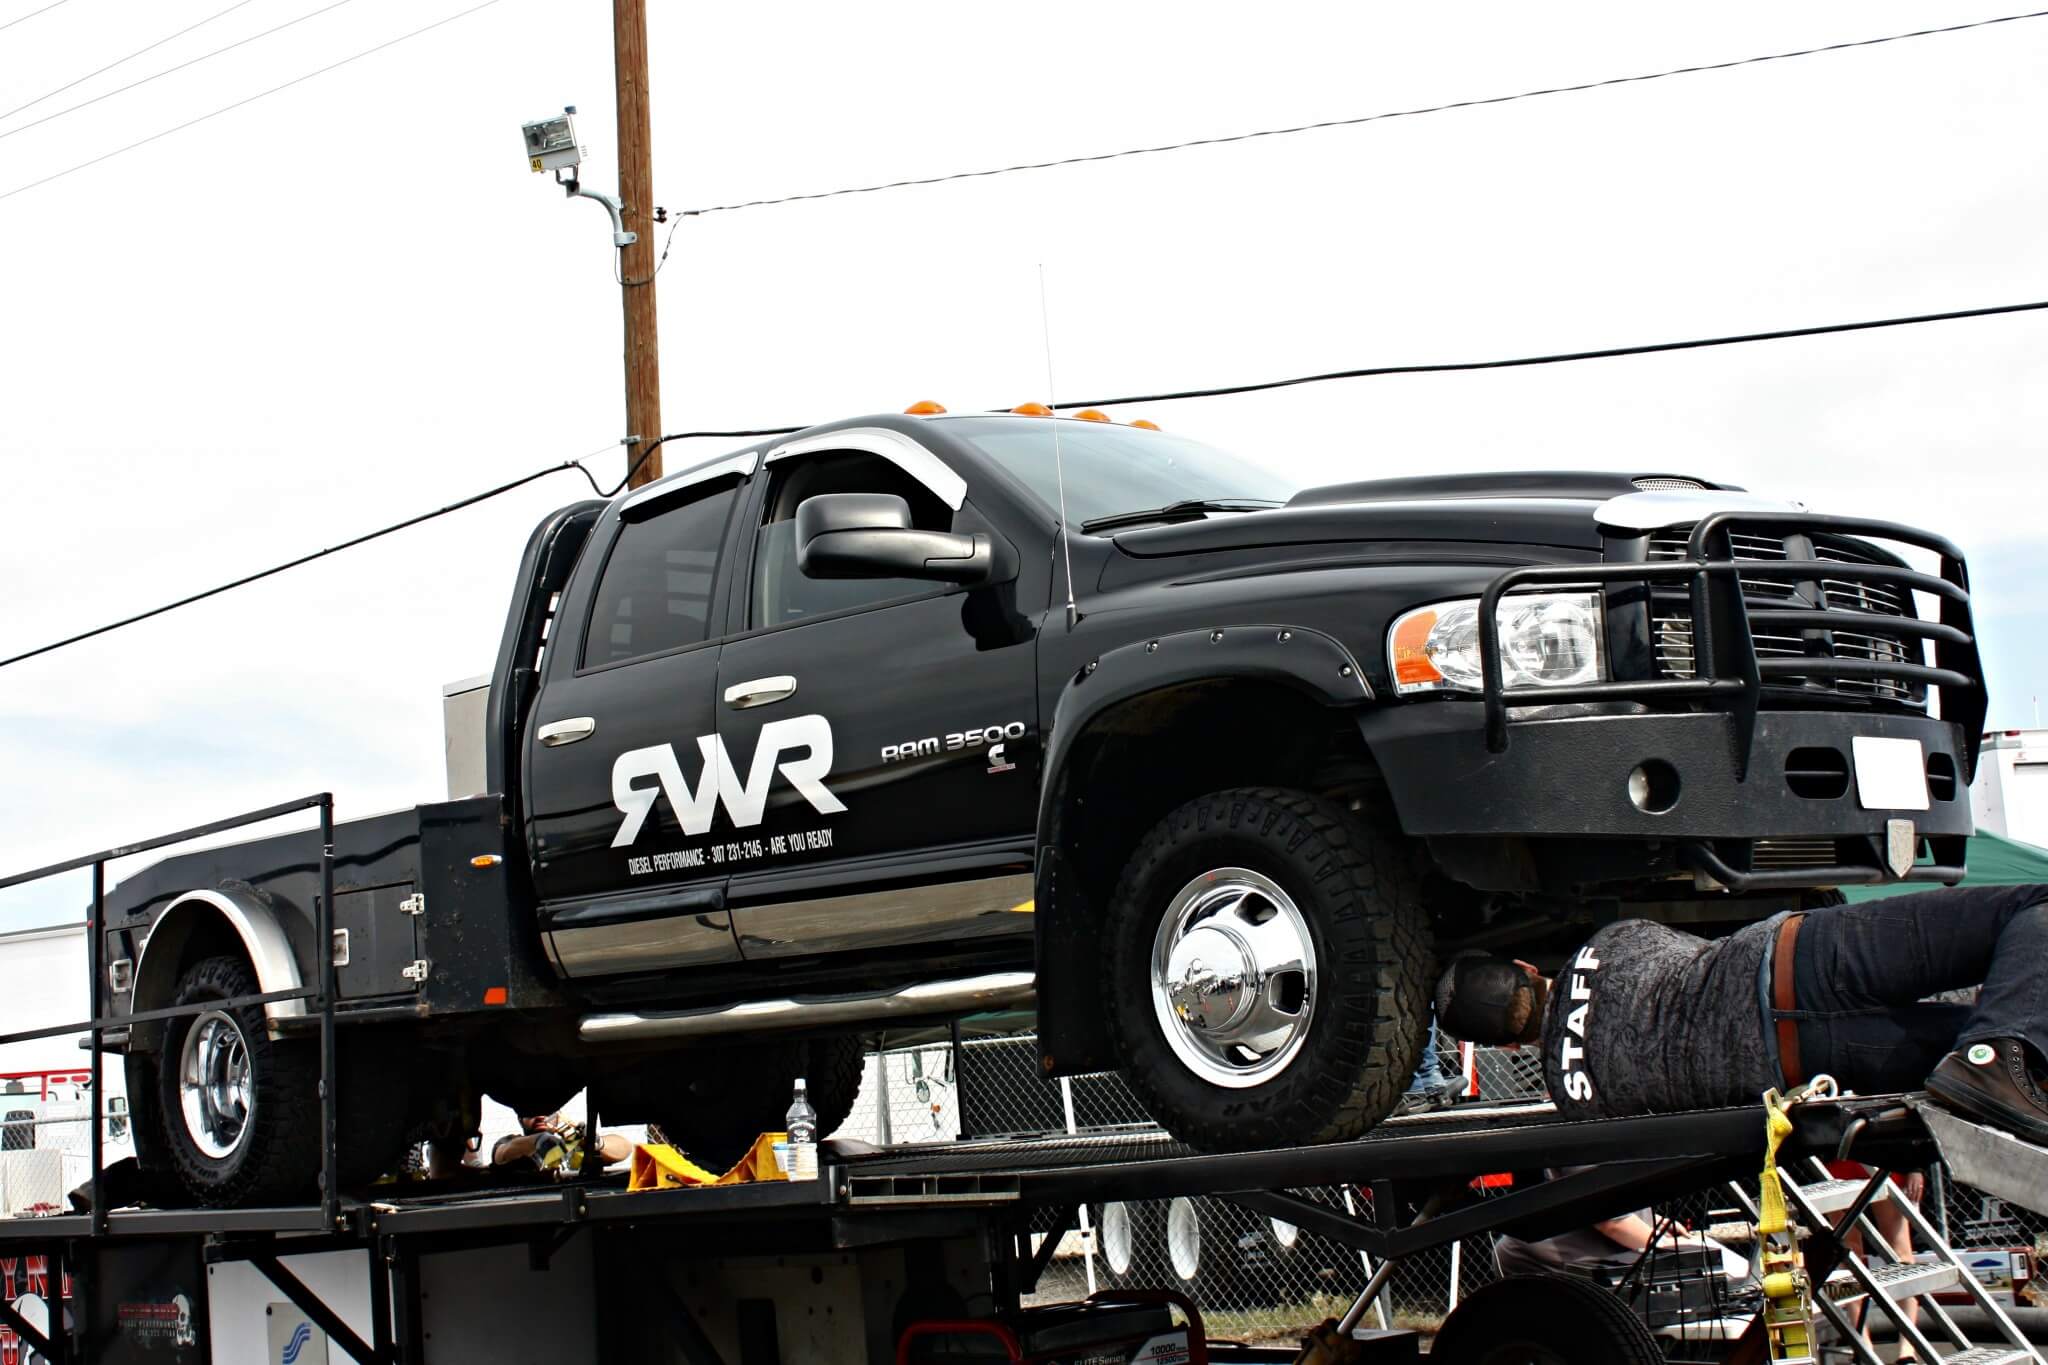 While it may not look like much more than your average work truck, this black dually Cummins was packing some major horsepower under the hood and put on quite the show for the crowd. Compound turbos and plenty of fuel are just what a tow rig needs… for hard work and weekend fun.